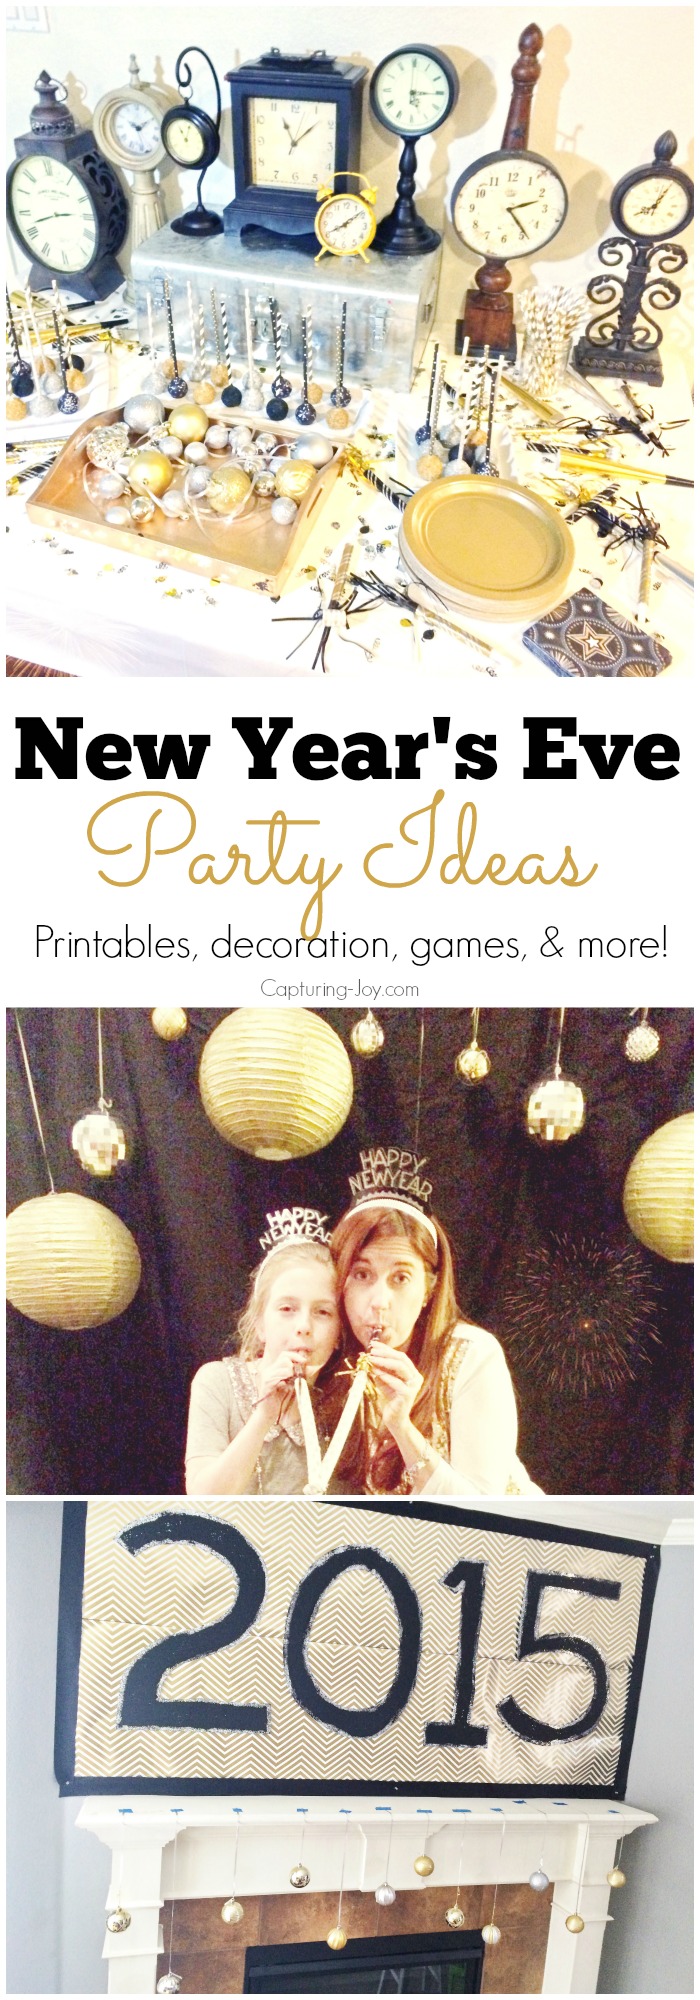 New Years Eve Party Ideas with prints games decorations